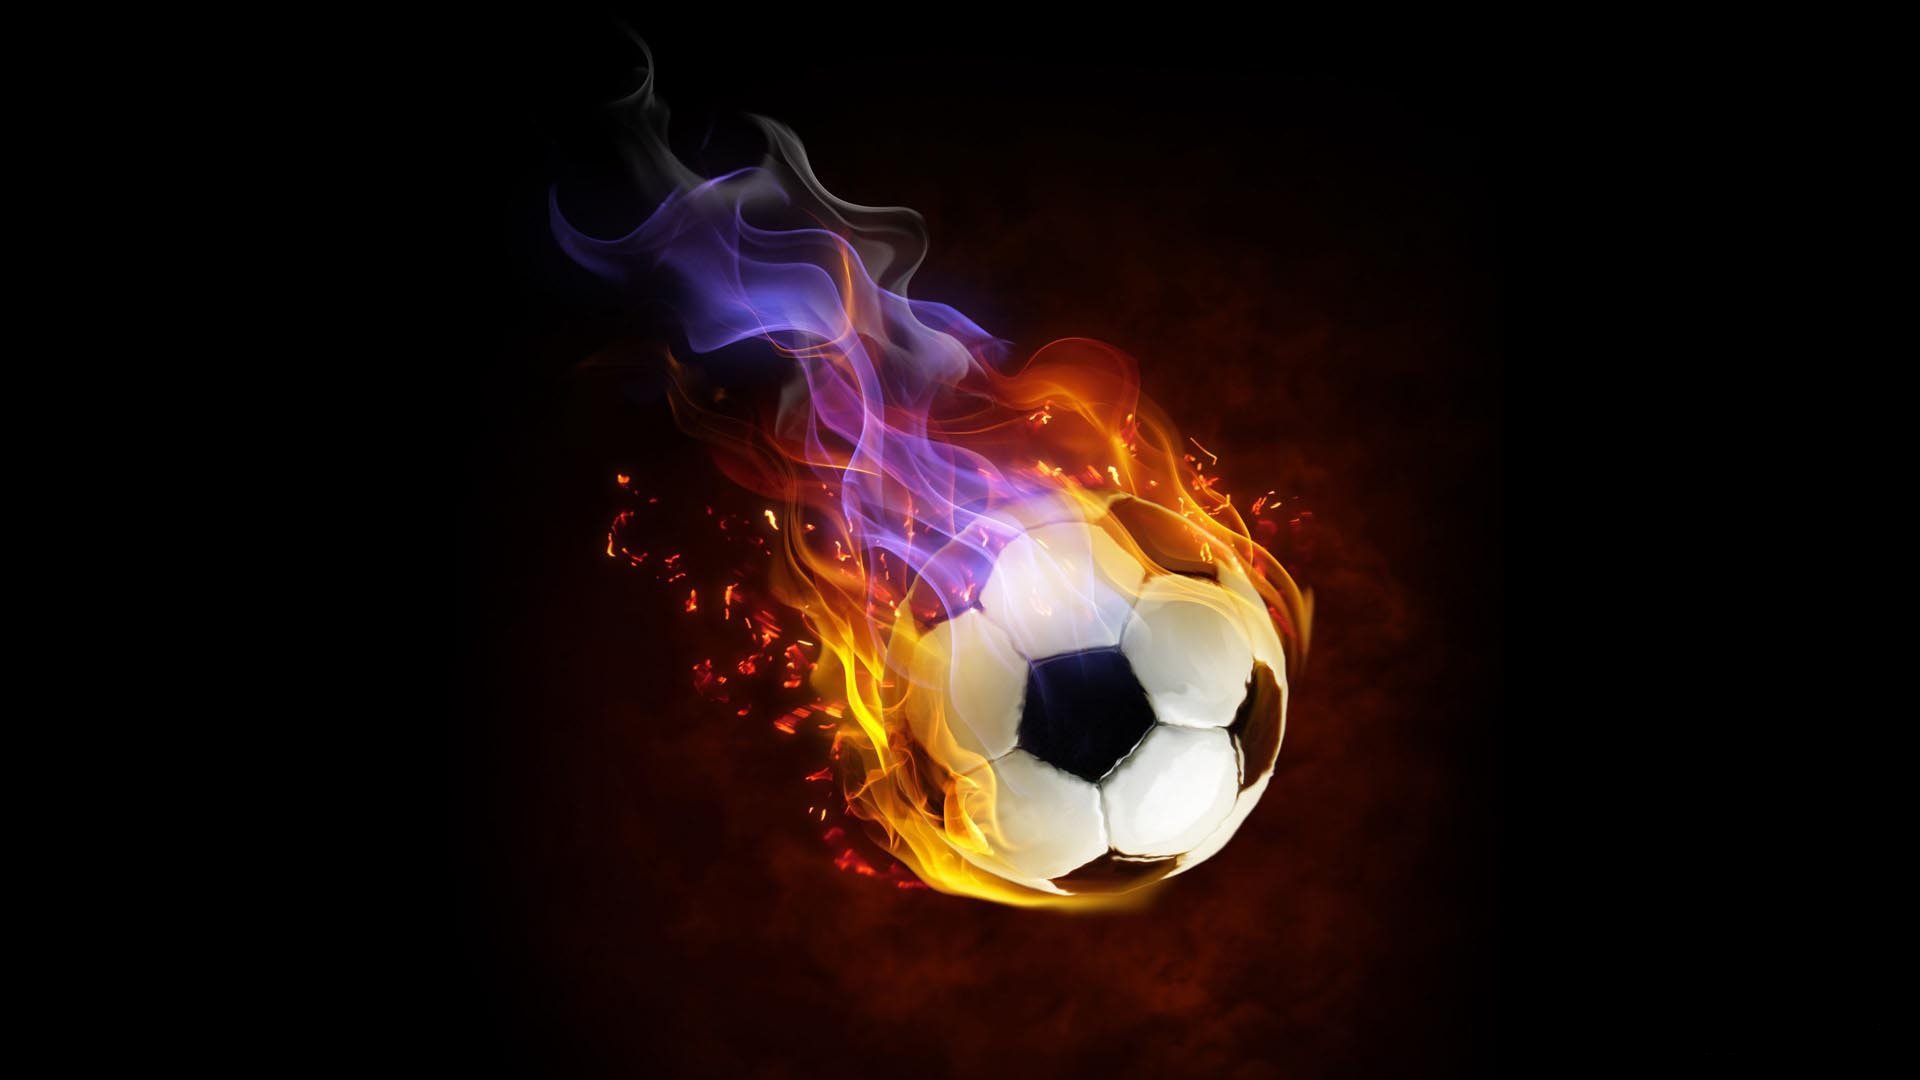 HD Cool Soccer Wallpapers 1920x1080